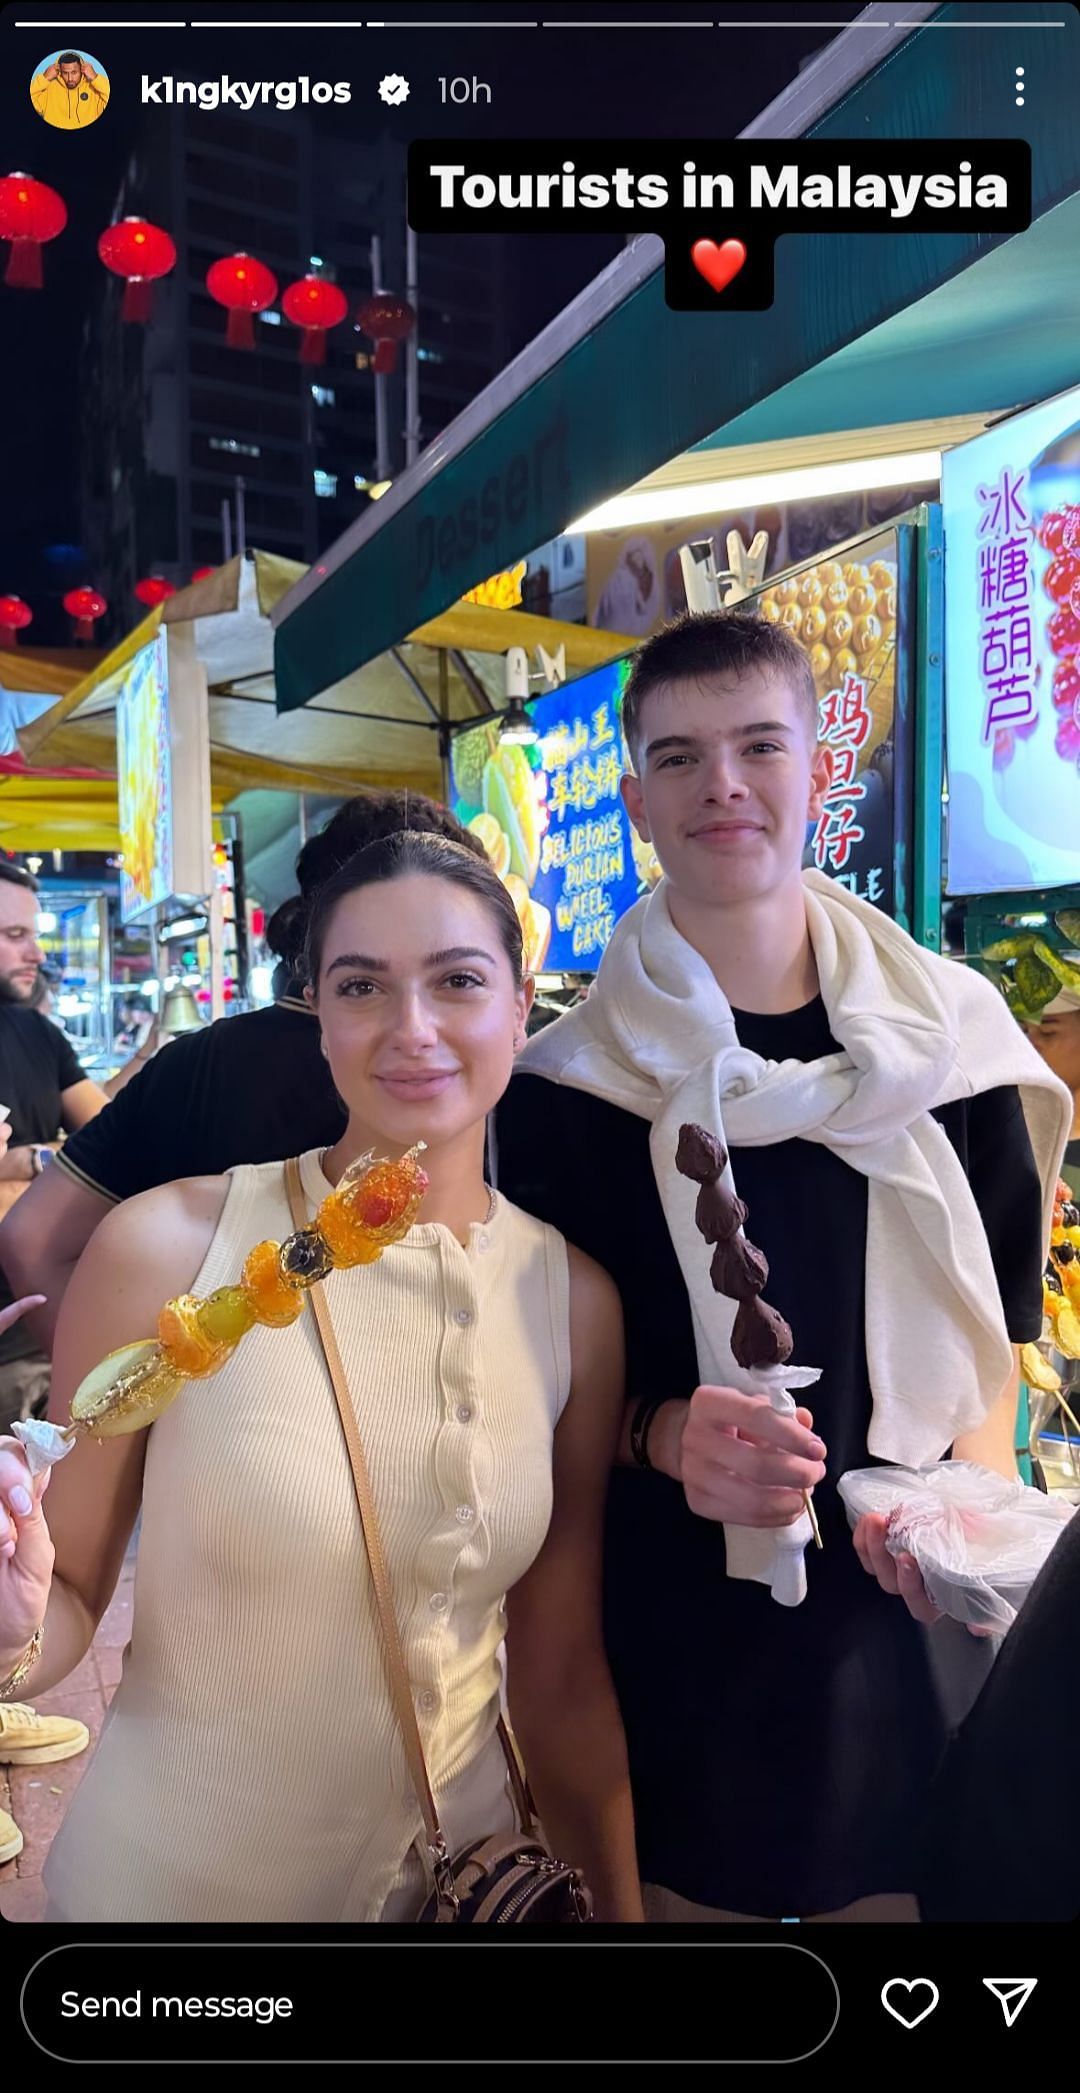 Nick Kyrgios&#039; Instagram post featuring Costeen Hatzi and a young man who joined them on the trip enjoying Malaysian street food